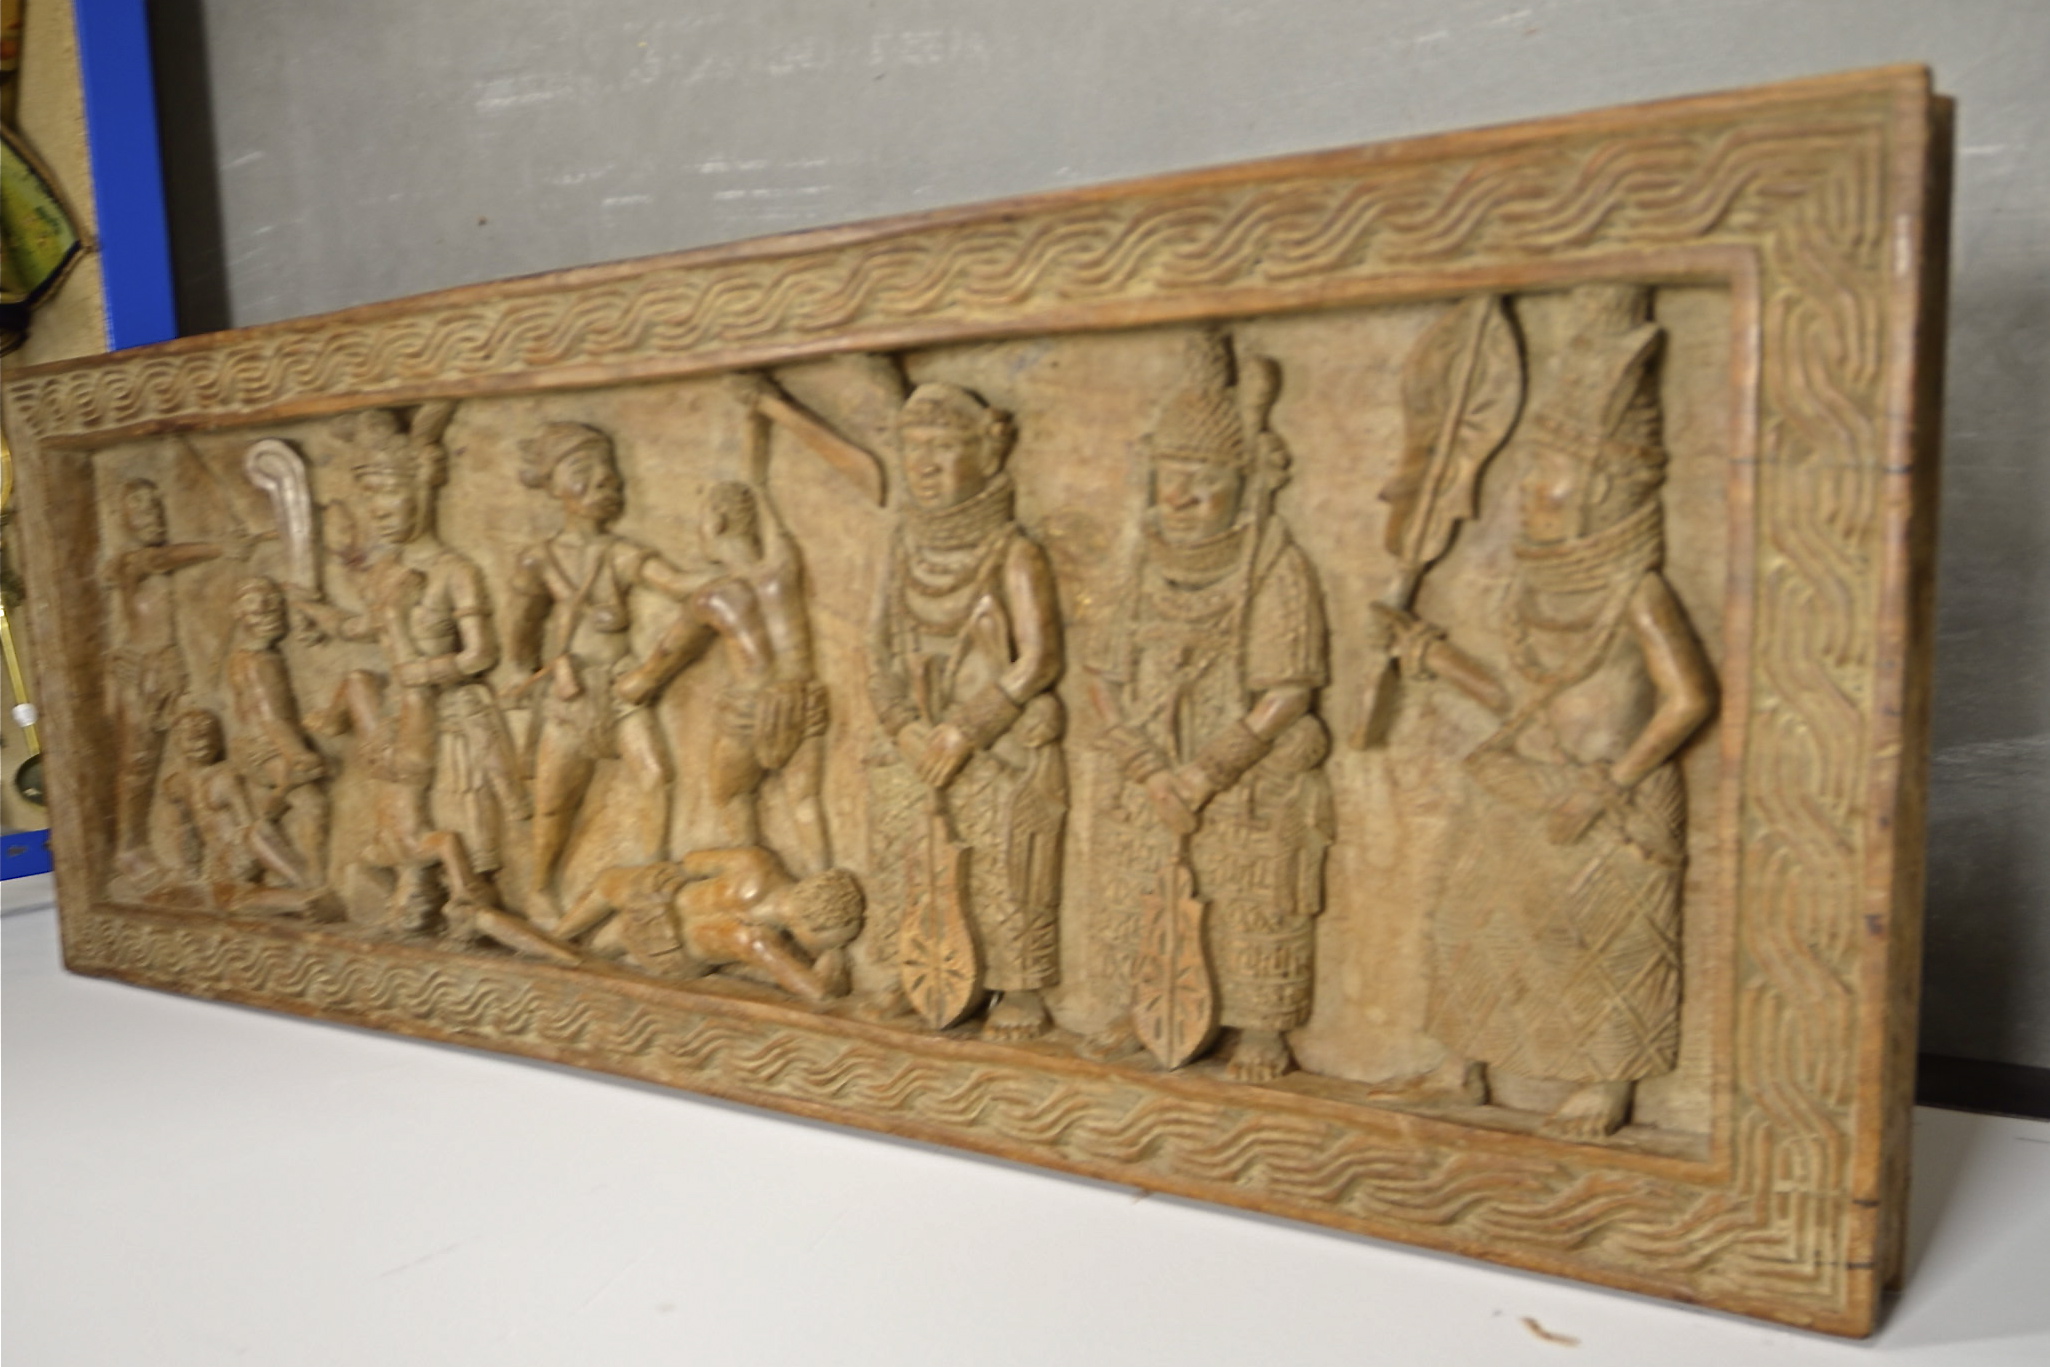 A Benin table and coffer lid, 155cm x 45cm x 52cm, with carved decoration (2) - Bild 2 aus 5